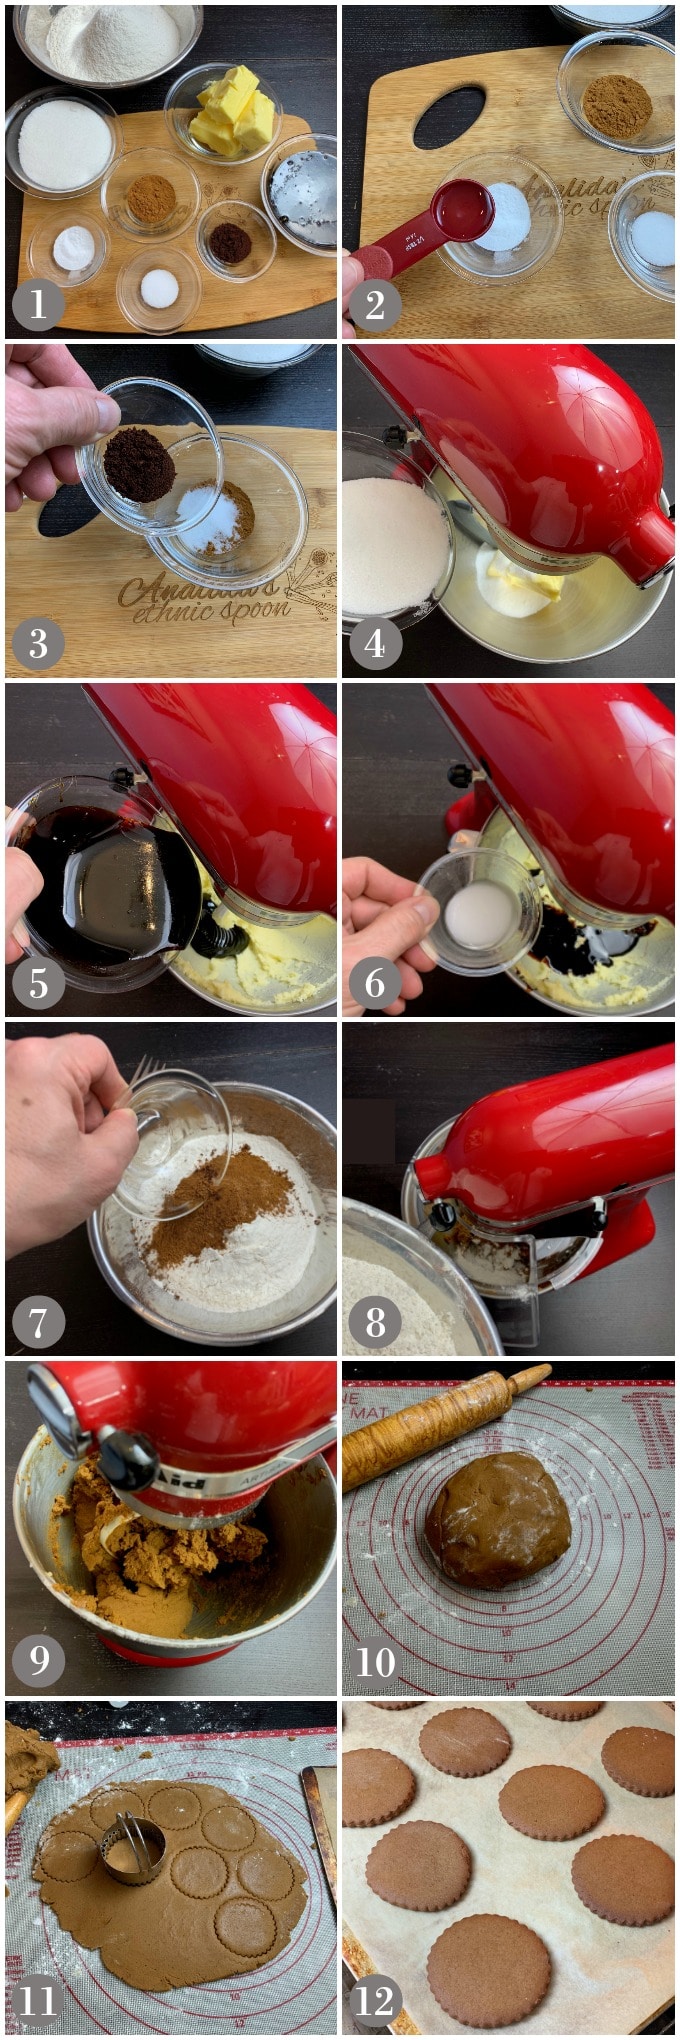 A collage of photos showing the ingredients and a stand mixer to make cinnamon snaps cookies.